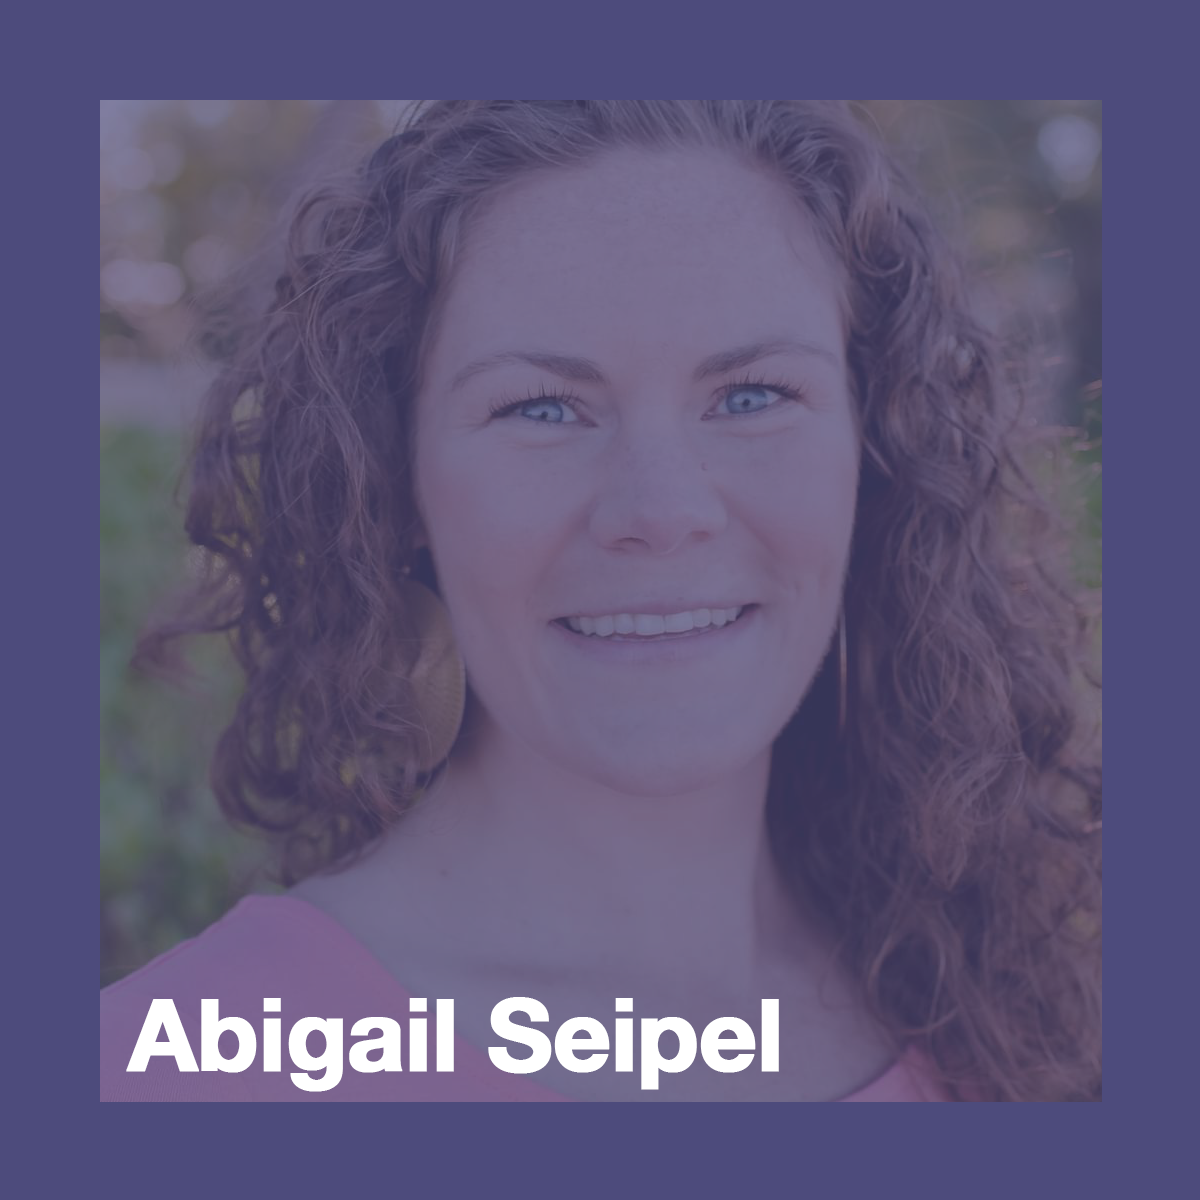 Abigail Seipel, Doctor of Physical Therapy. Abigail is wearing gold earrings and smiling at the camera.